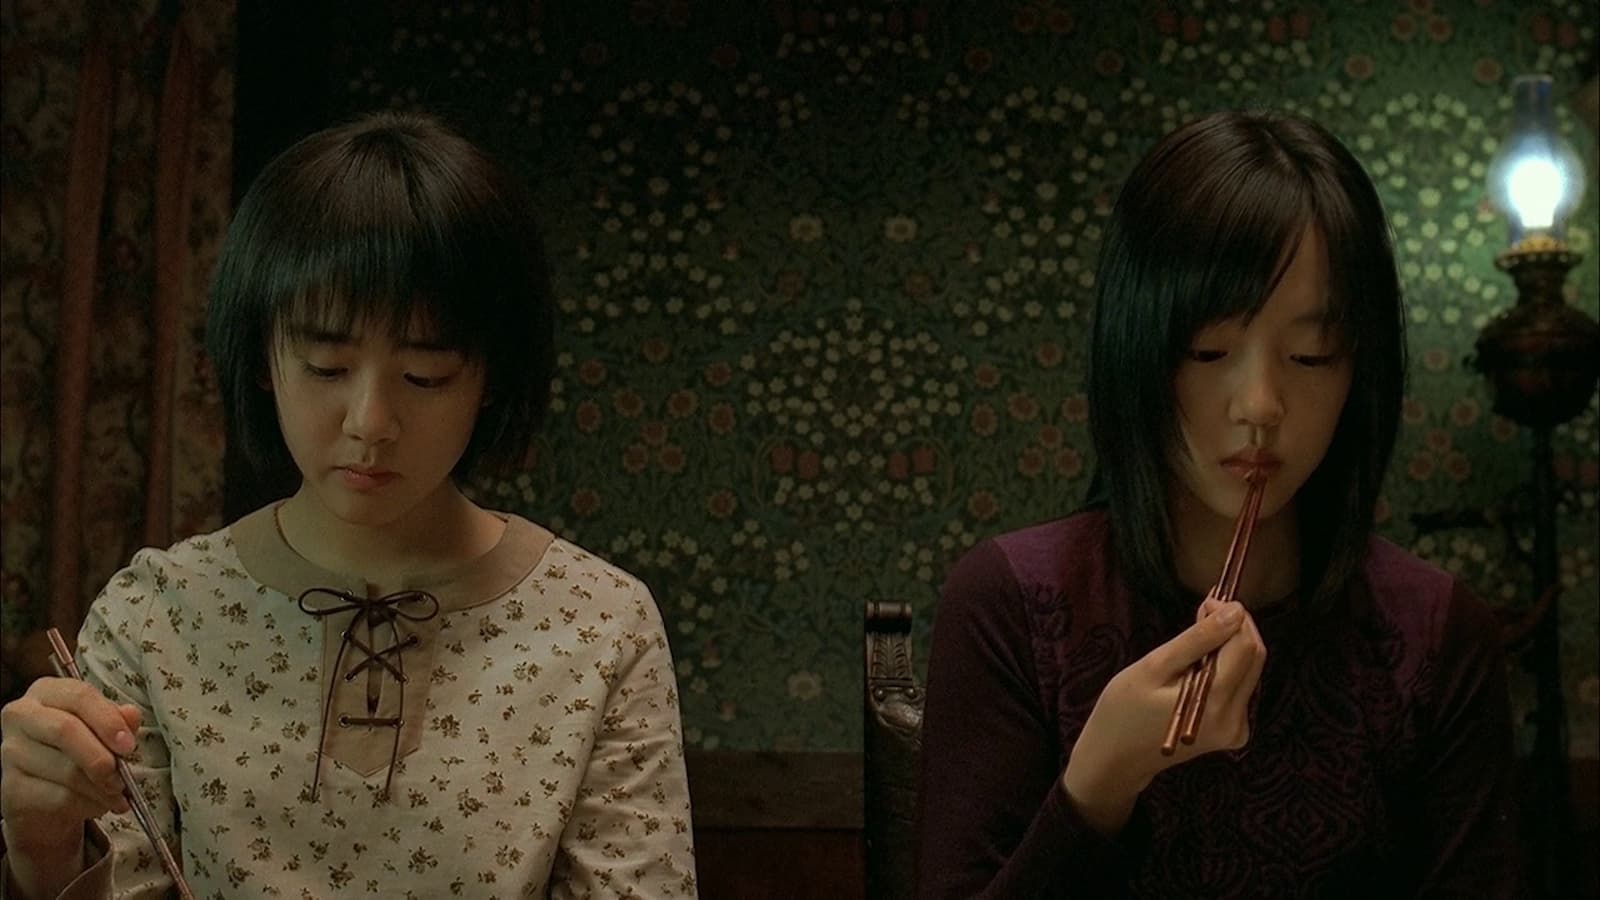 Korean Horror: A Tale of Two Sisters (35mm)